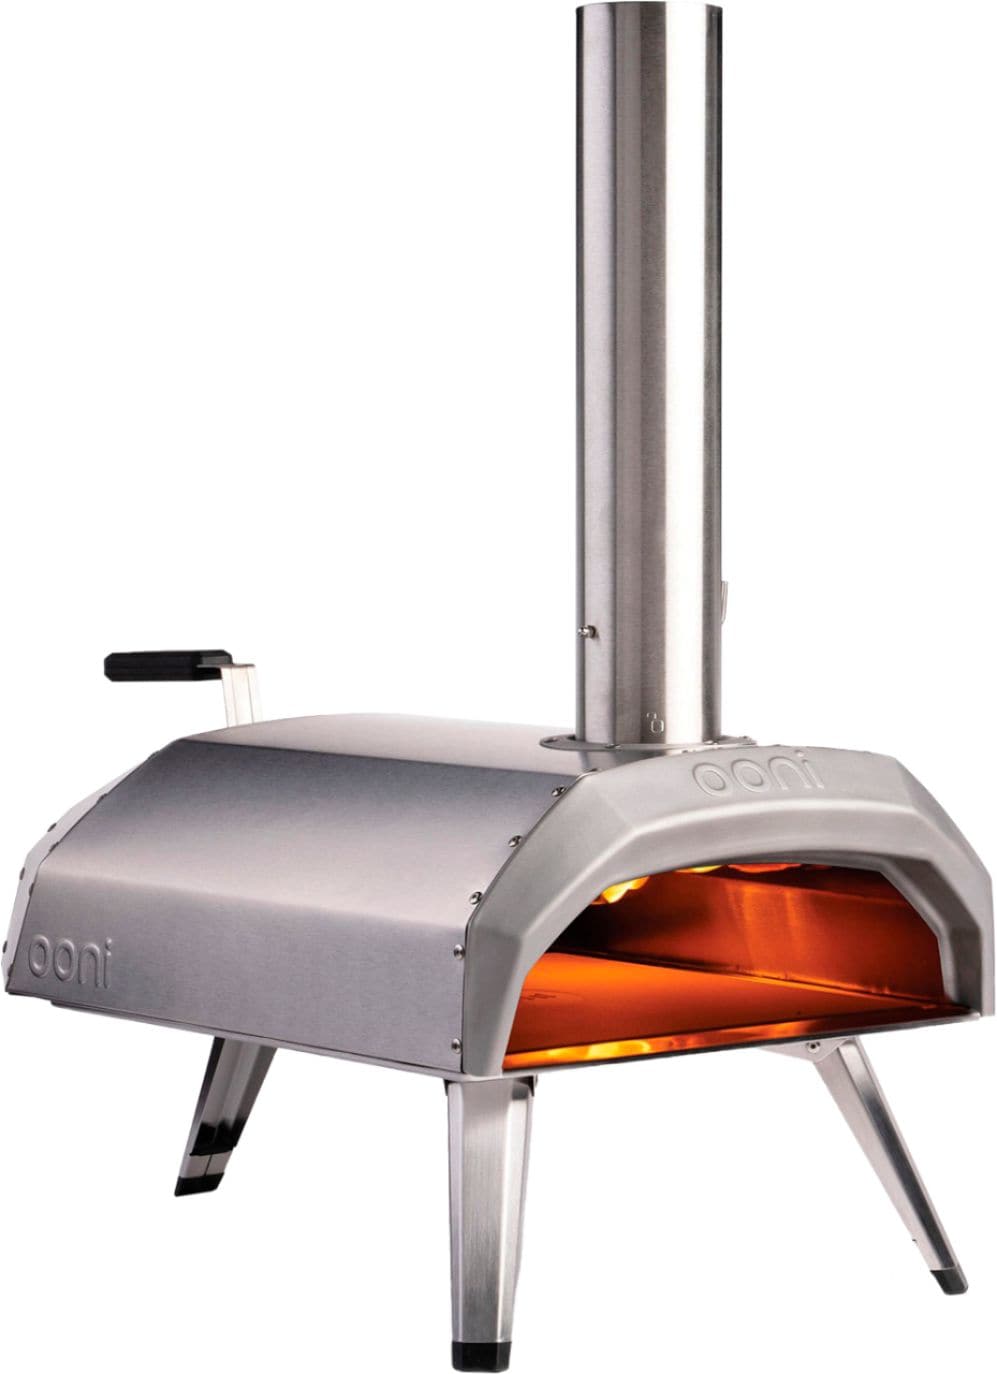 Ooni - Karu 12 Inch Portable Pizza Oven - Silver_5